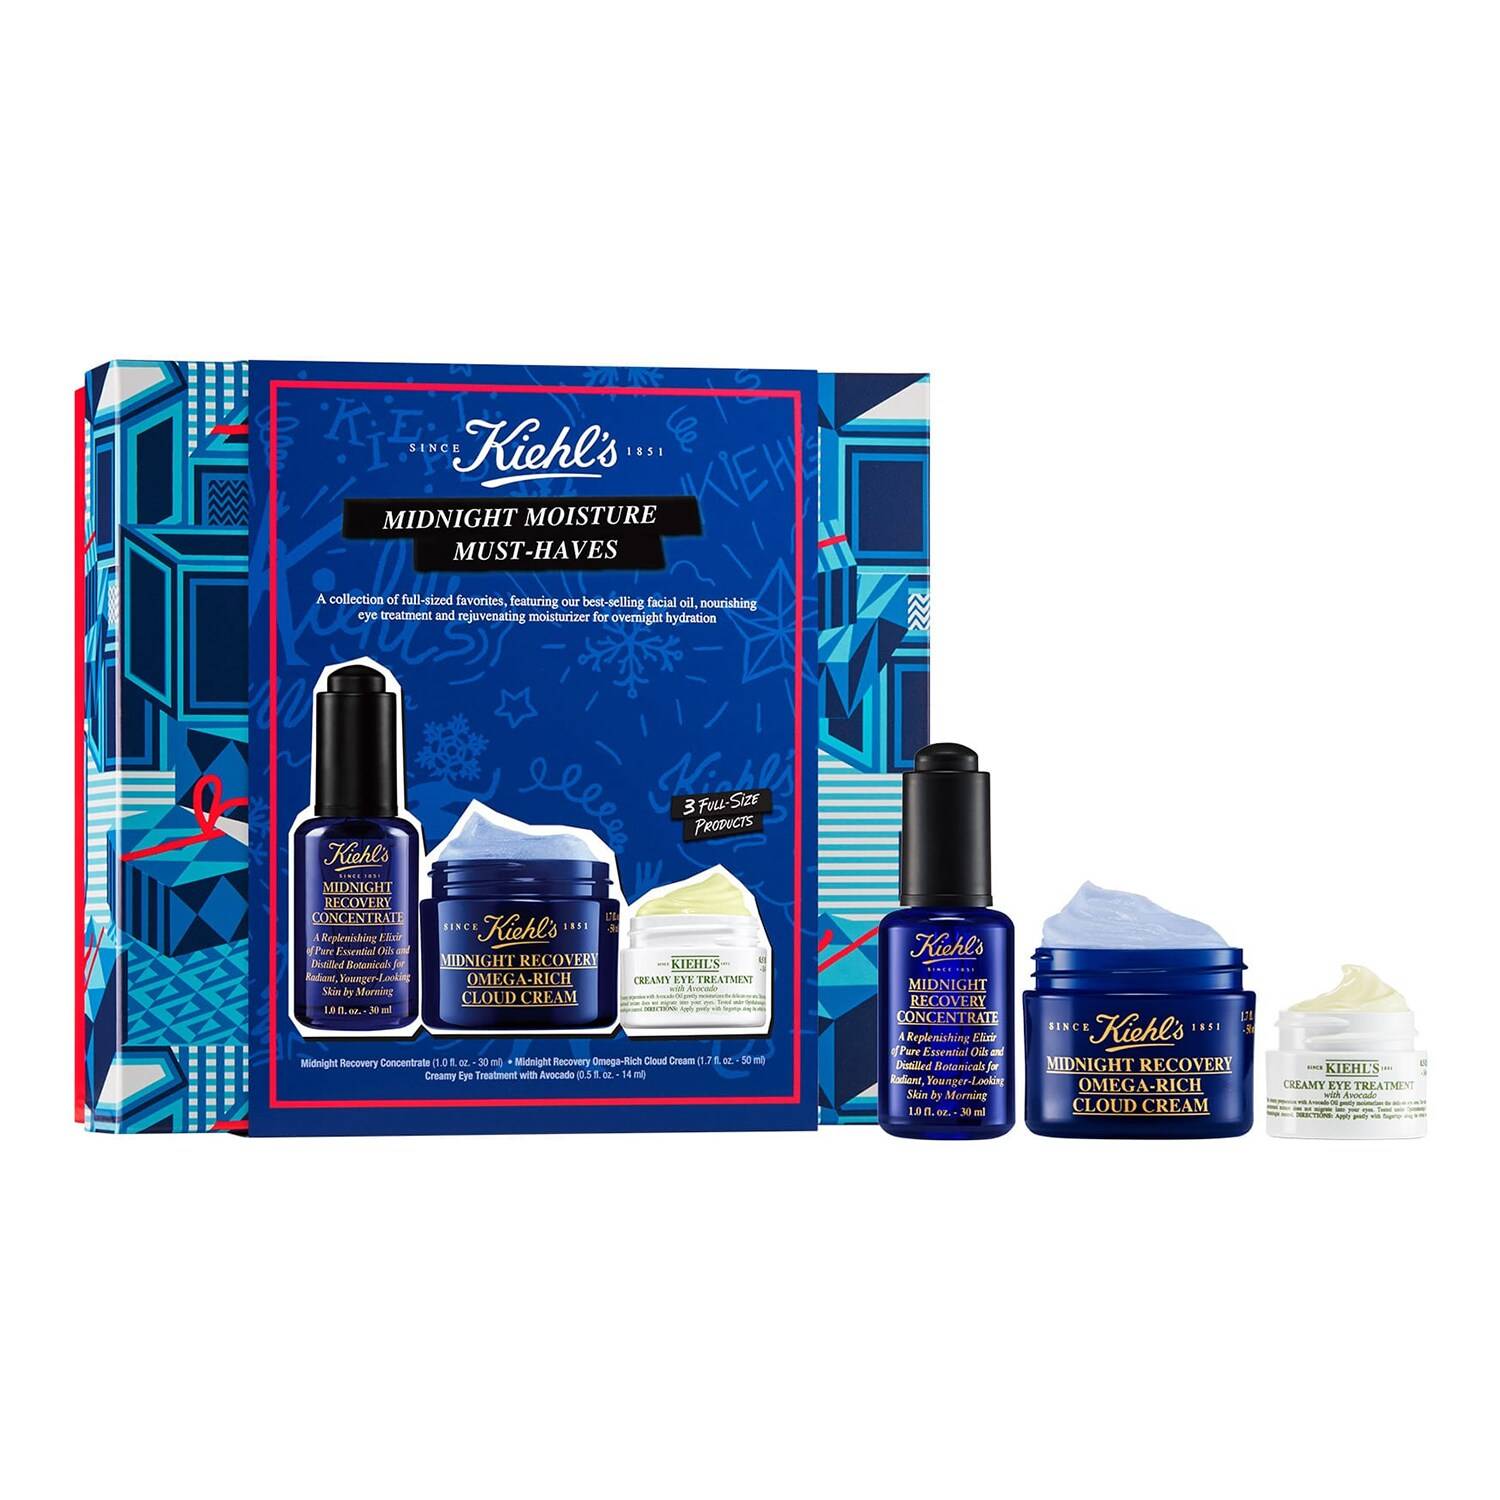 KIEHL'S SINCE 1851 Nighttime Hydration Essentials Holiday Gift Set